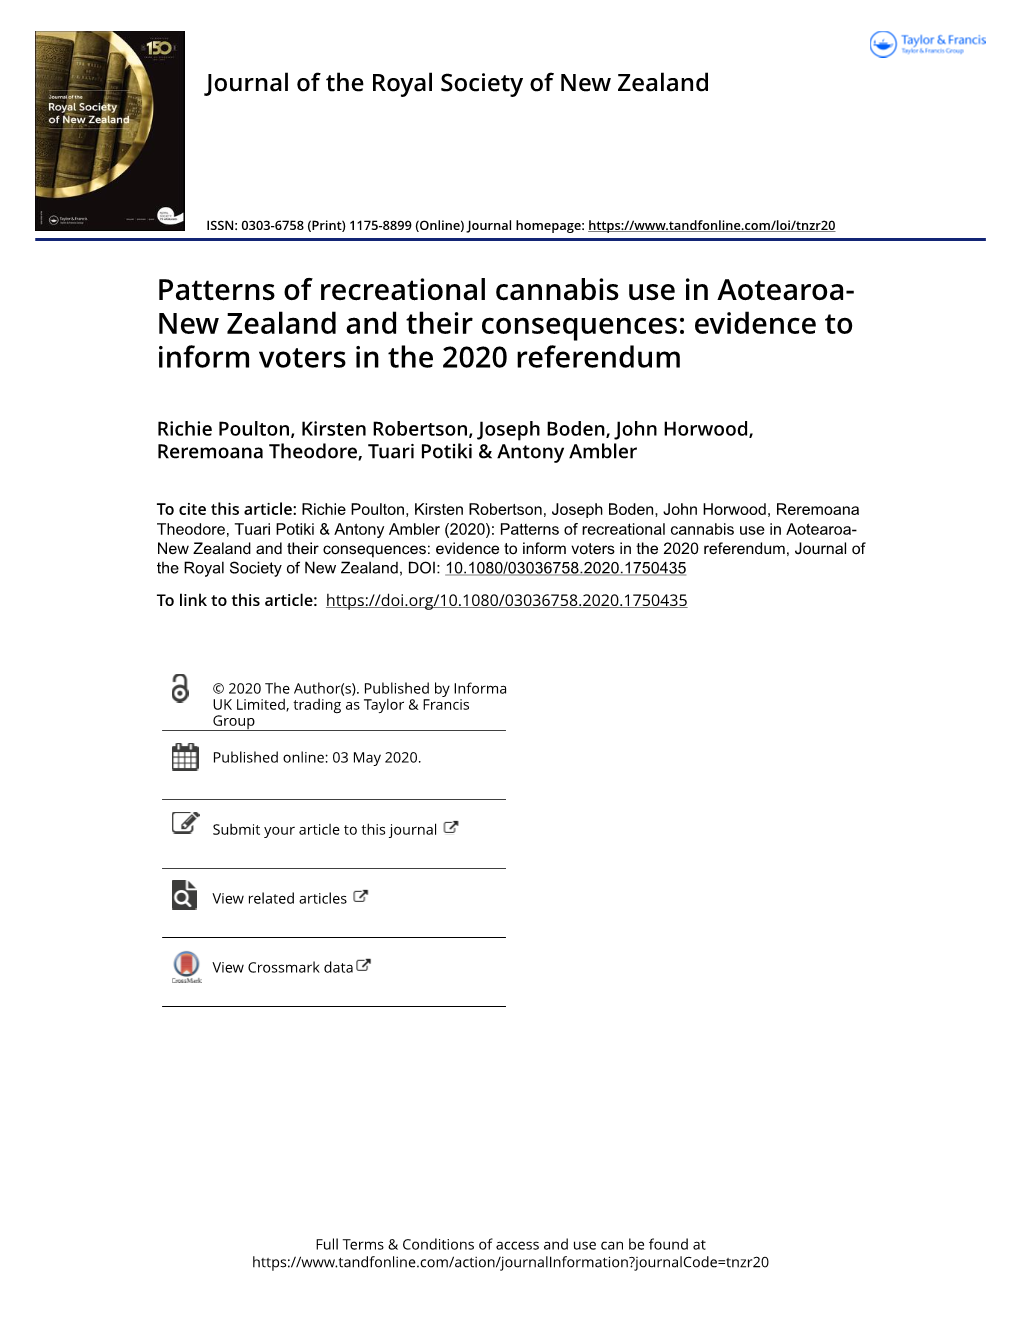 Patterns of Recreational Cannabis Use in Aotearoa-New Zealand and Their Consequences: Evidence to Inform Voters in the 2020 Referendum